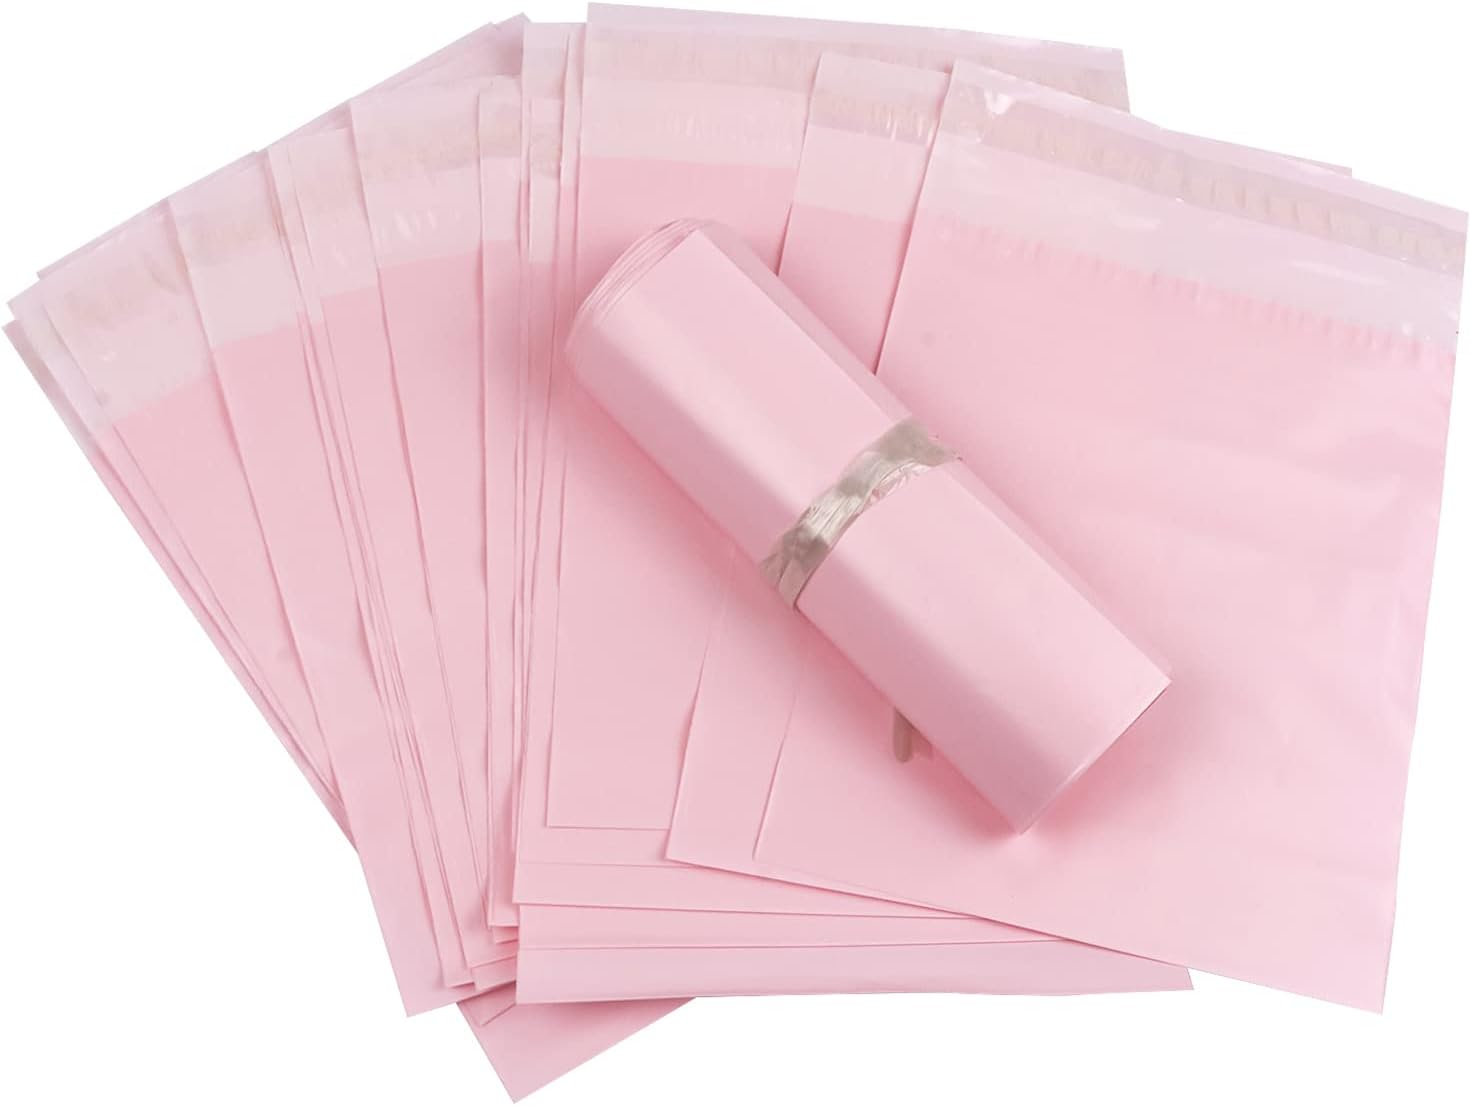 Personal Disposal Bags, Set of 100 Sanitary Napkin Disposal Bags, Hide Personal Items, Self Sealing Bag to Seal Smell, Beautiful Light Pink Color, Suitable for Sanitary Napkin (Light Pink)